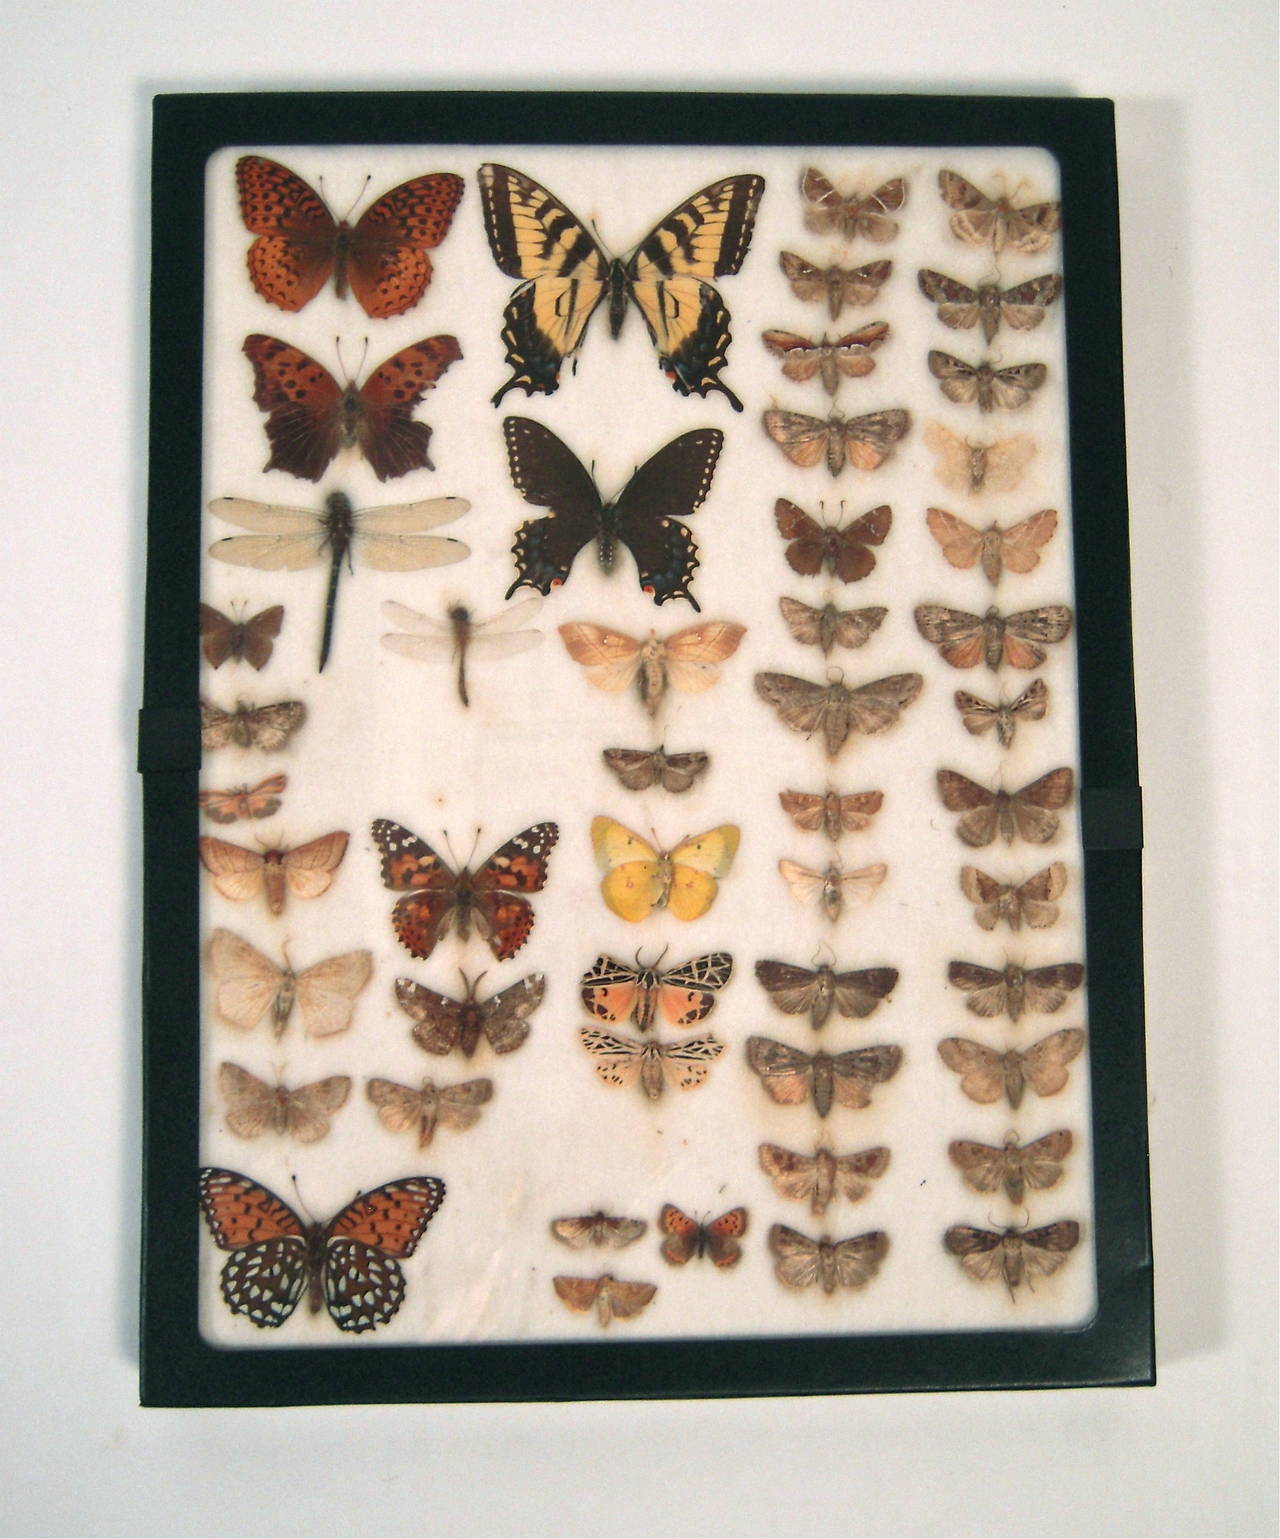 A collection of dried butterfly, moth and dragonfly specimens, circa 1930s, laid down on cotton filling in their original Riker specimen cases, with new glass tops.